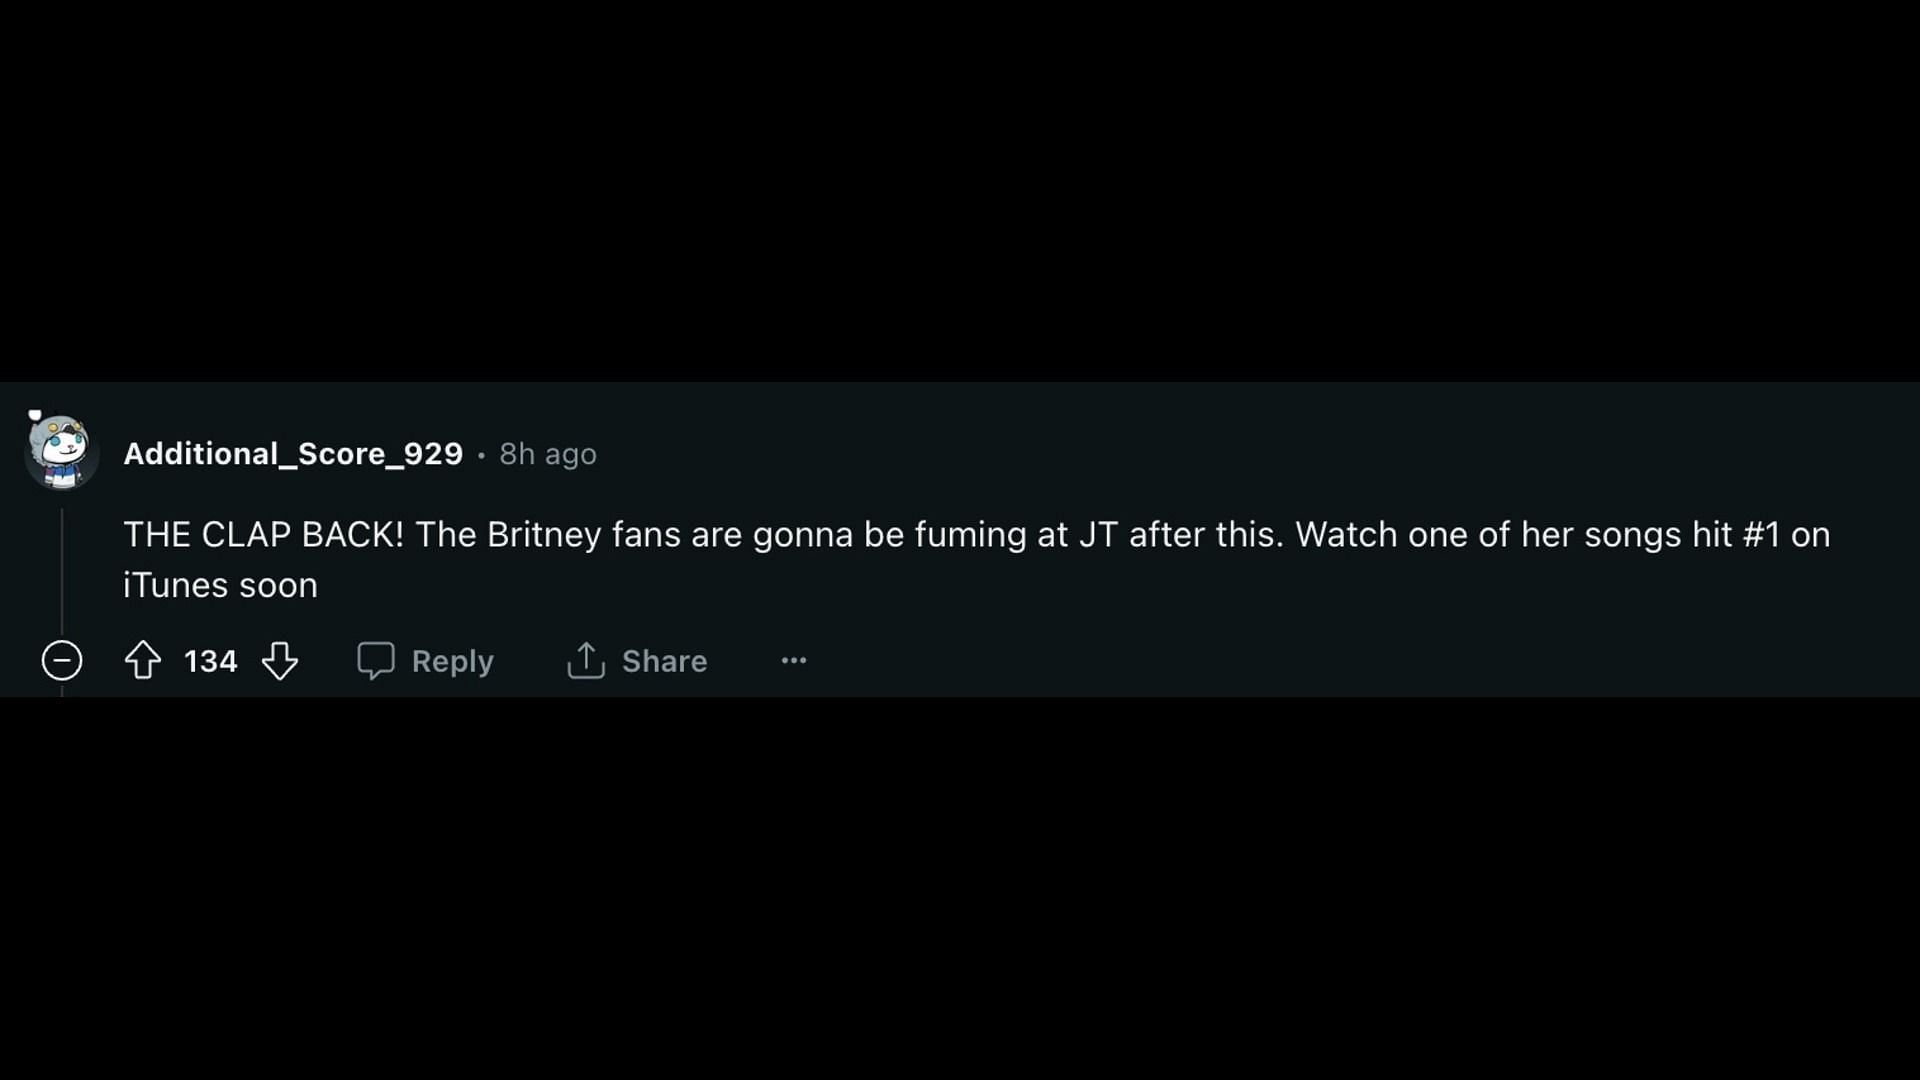 Fan talks about Britney&#039;s alleged diss at Justin. (Images via Reddit/@Fauxmoi)